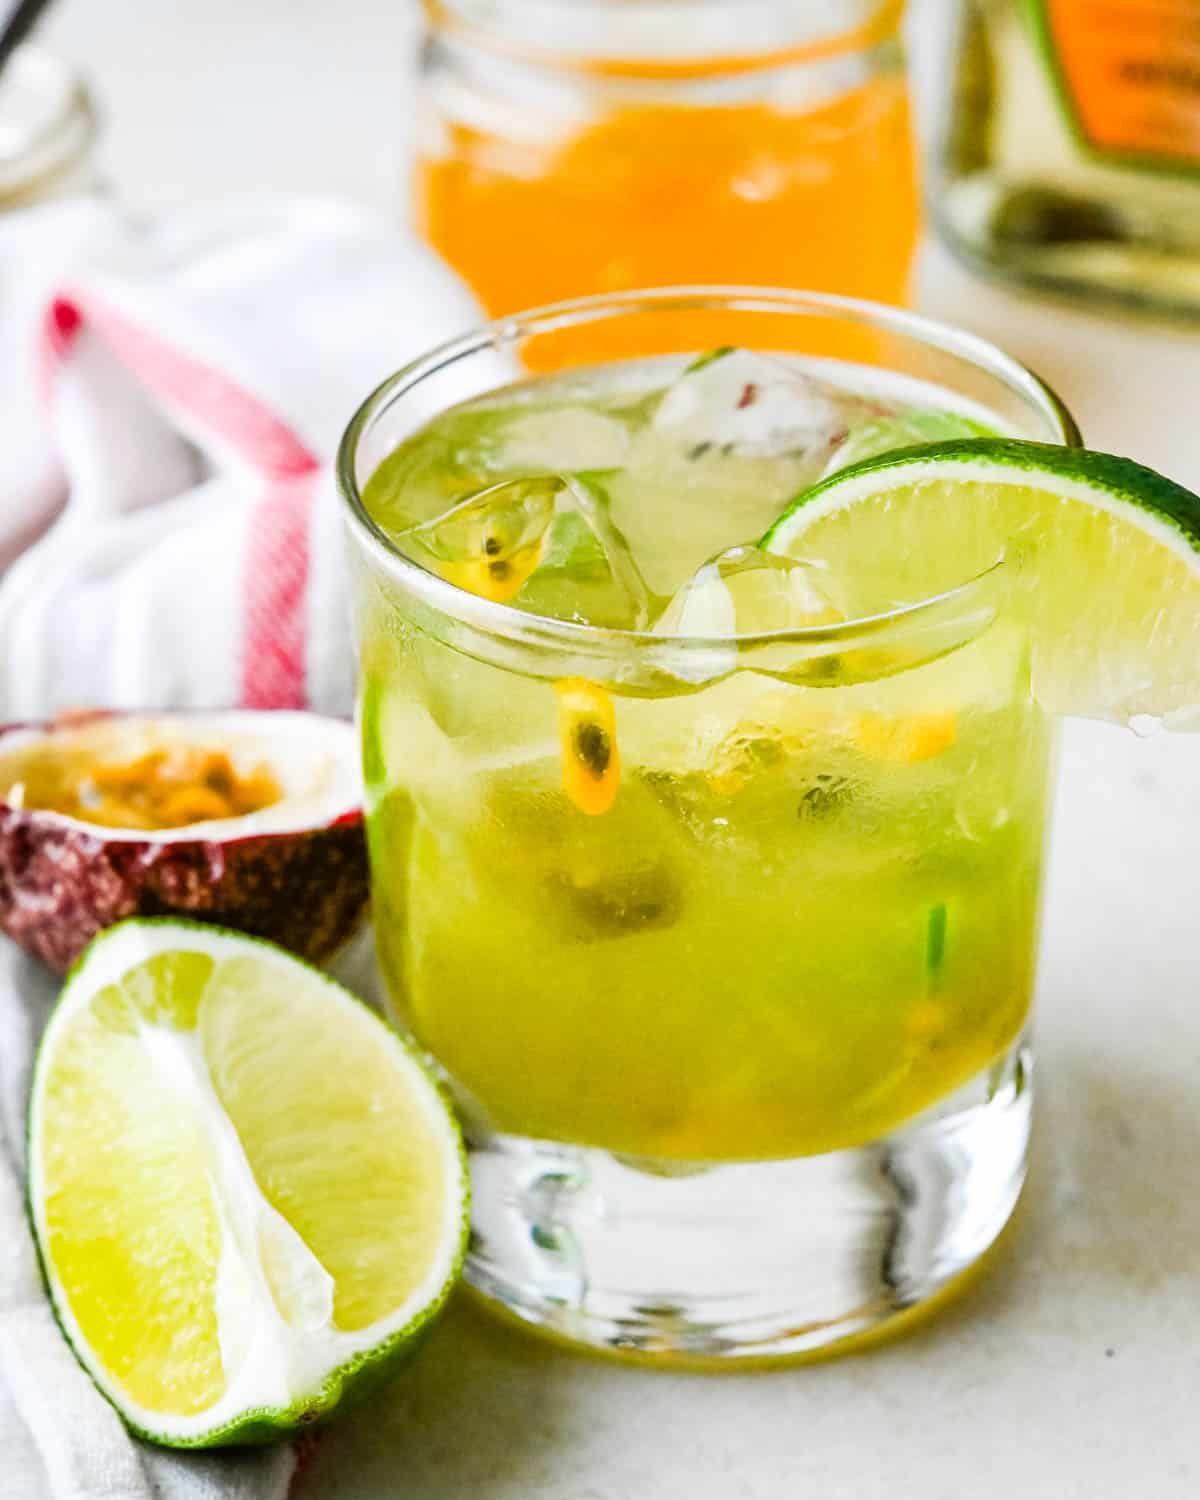 A Freshly made spicy passion fruit margarita with pulp and lime wedge.